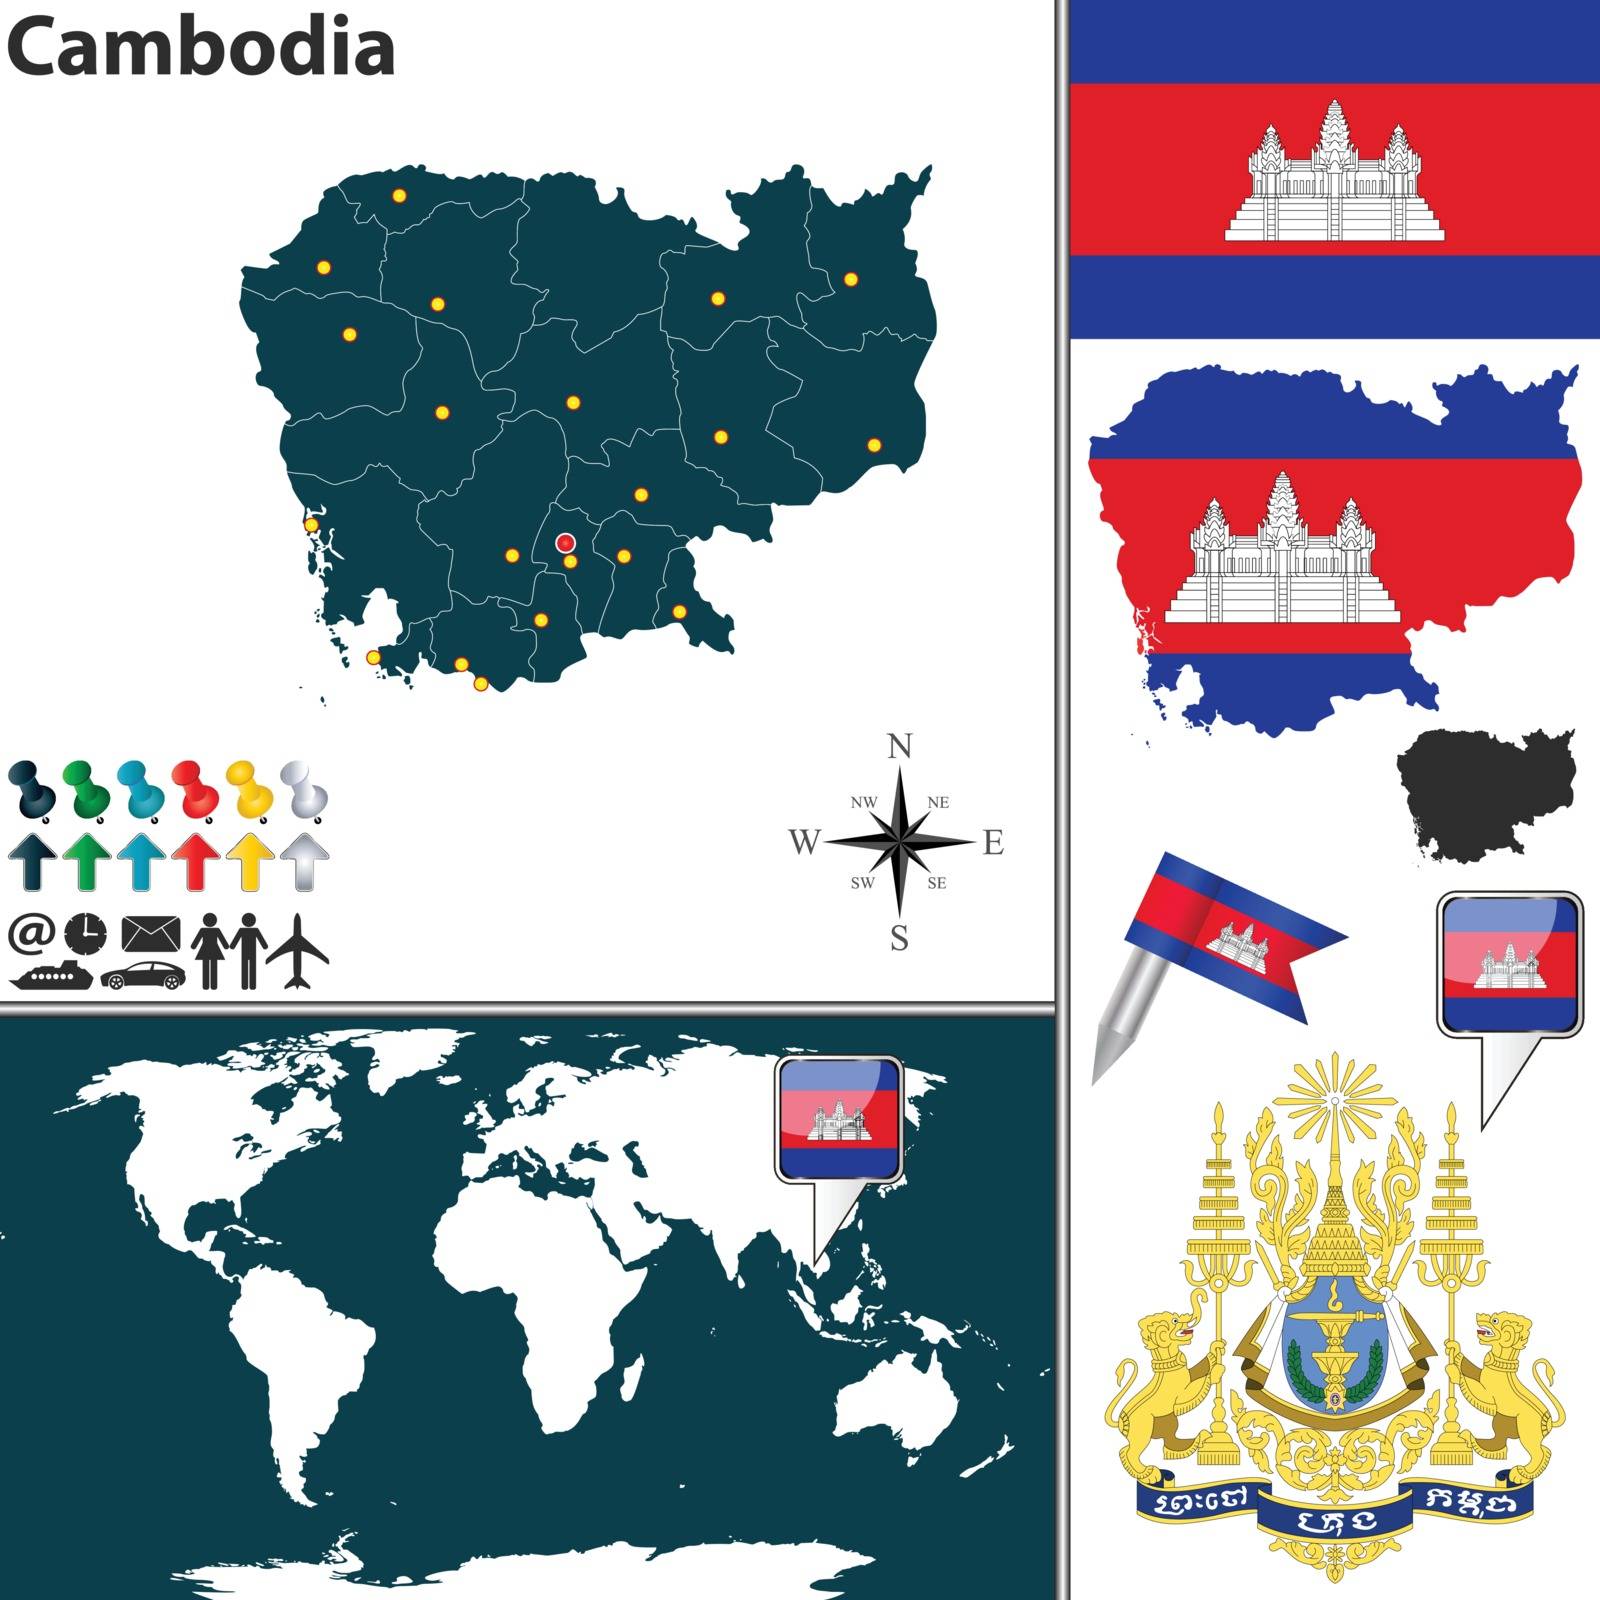 Map of Cambodia by sateda